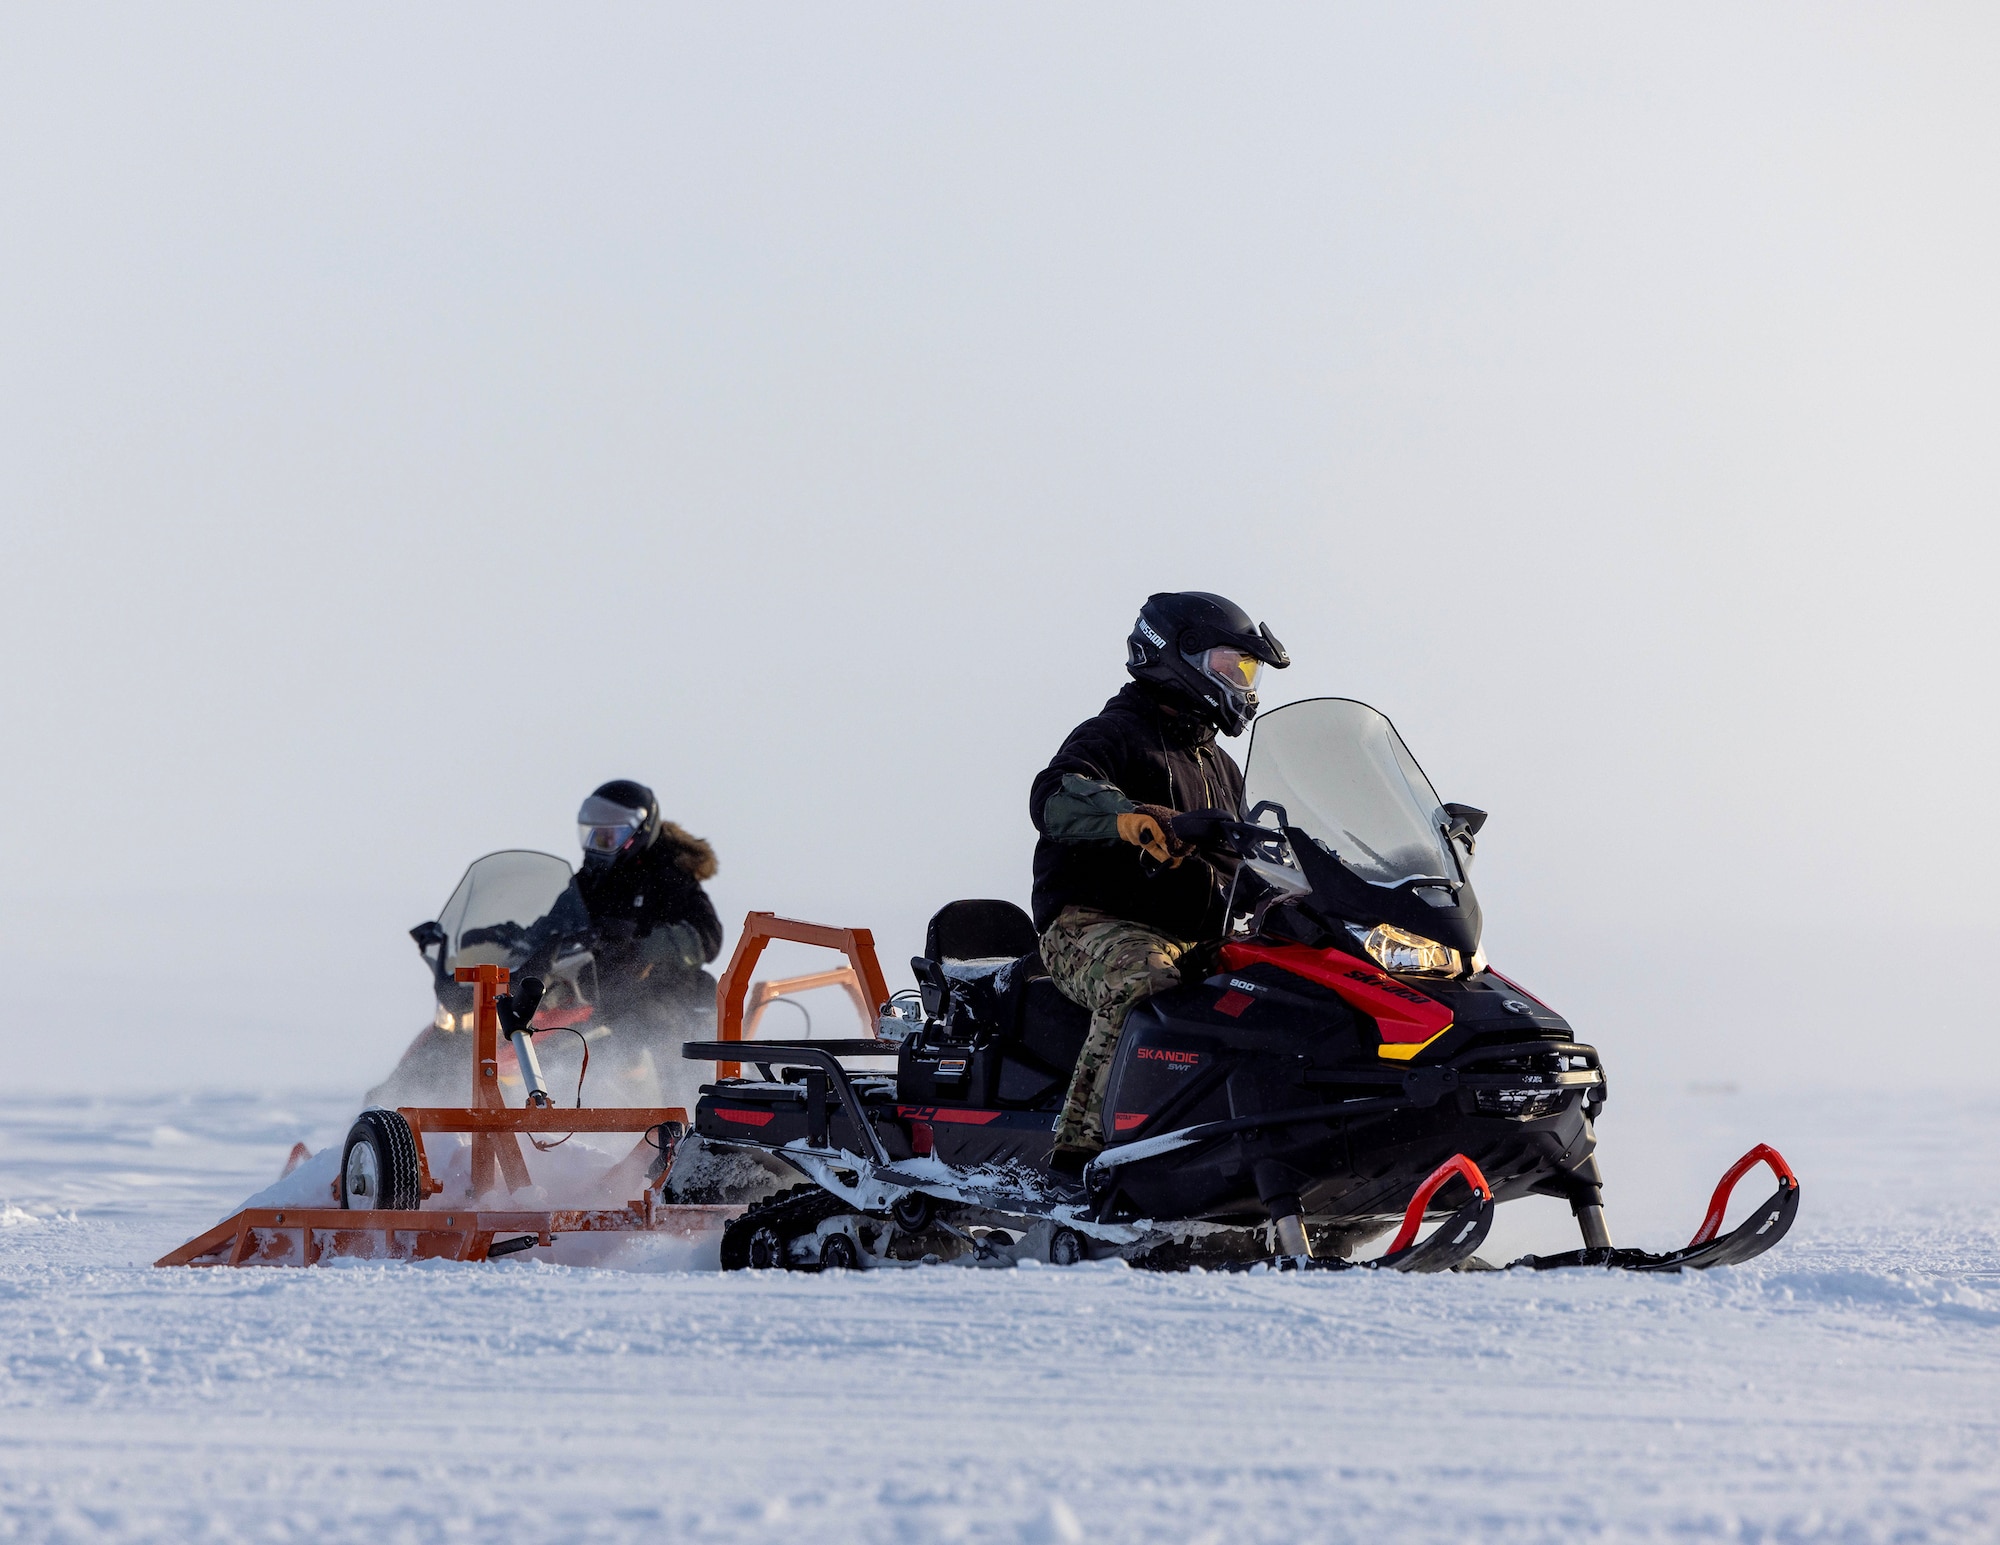 U.S. Air Force Master Sgt. Brian Shuey, 133rd Contingency Response Flight, grooms the ski landing area in Resolute Bay, Nunavut, Canada, March 12, 2023.